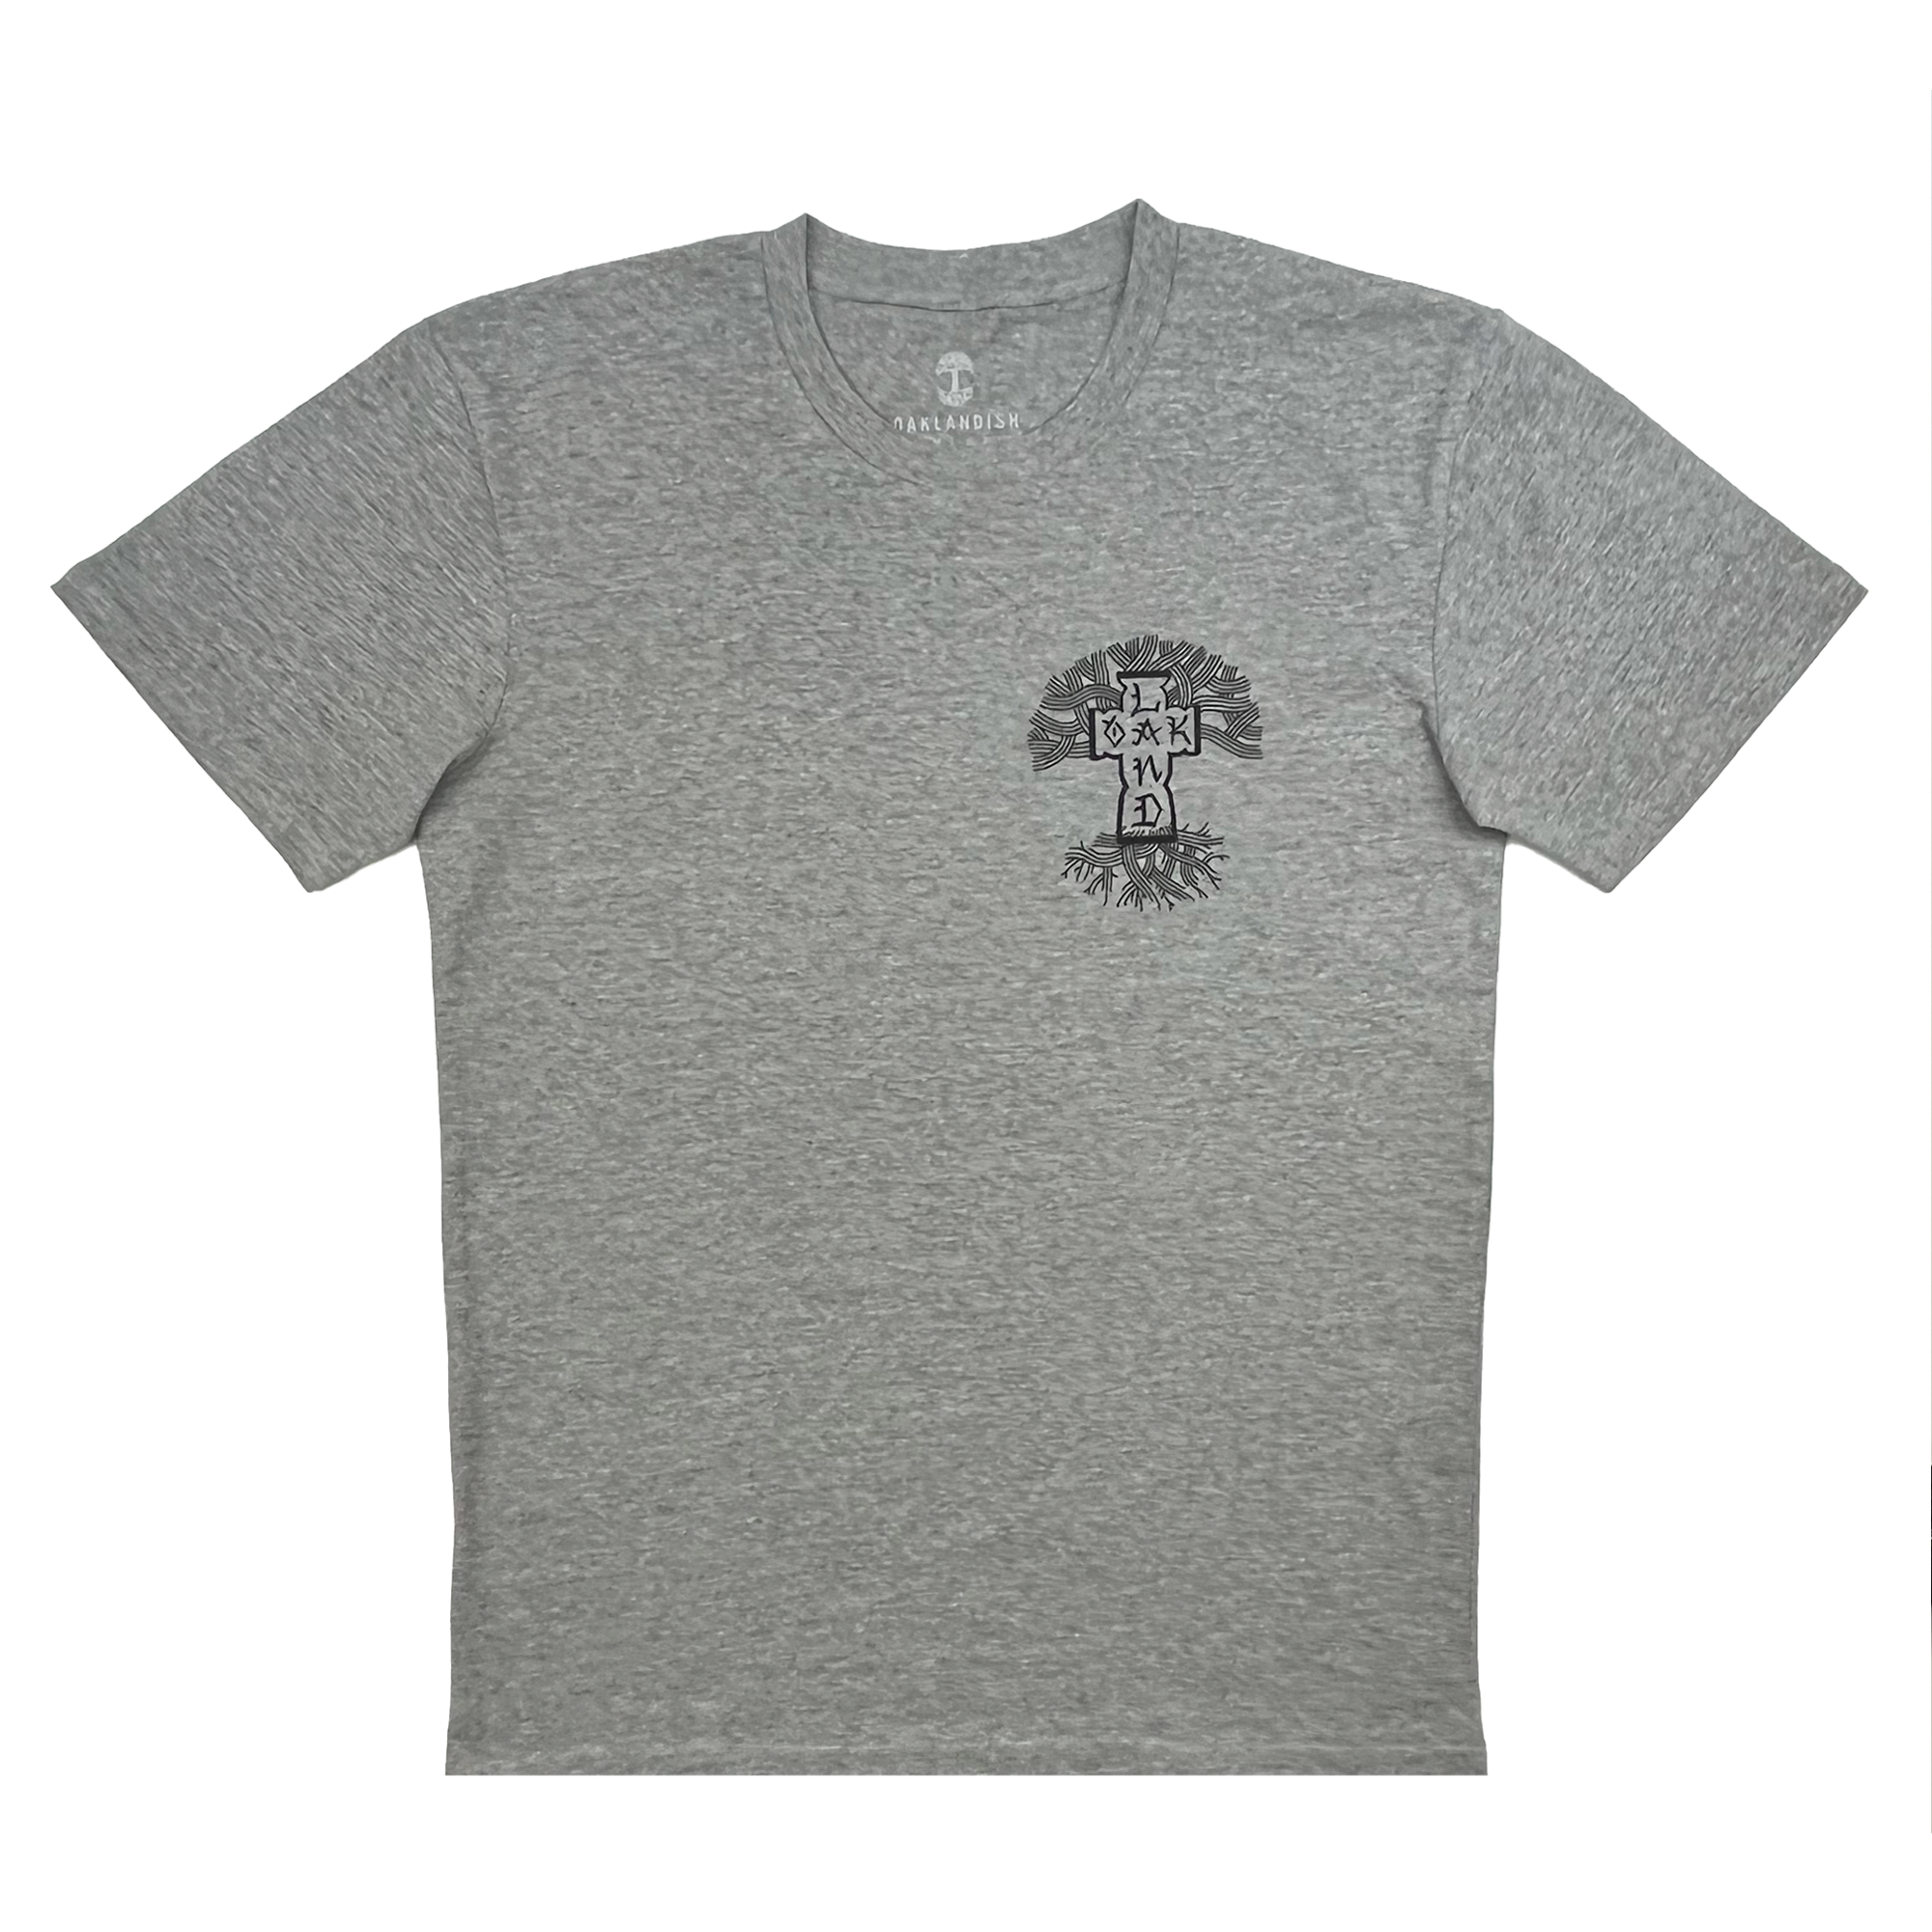 Front view of a black Oaklandish x Cali Cruise stylized logo design in black ink on the left chest of a heather grey t-shirt.